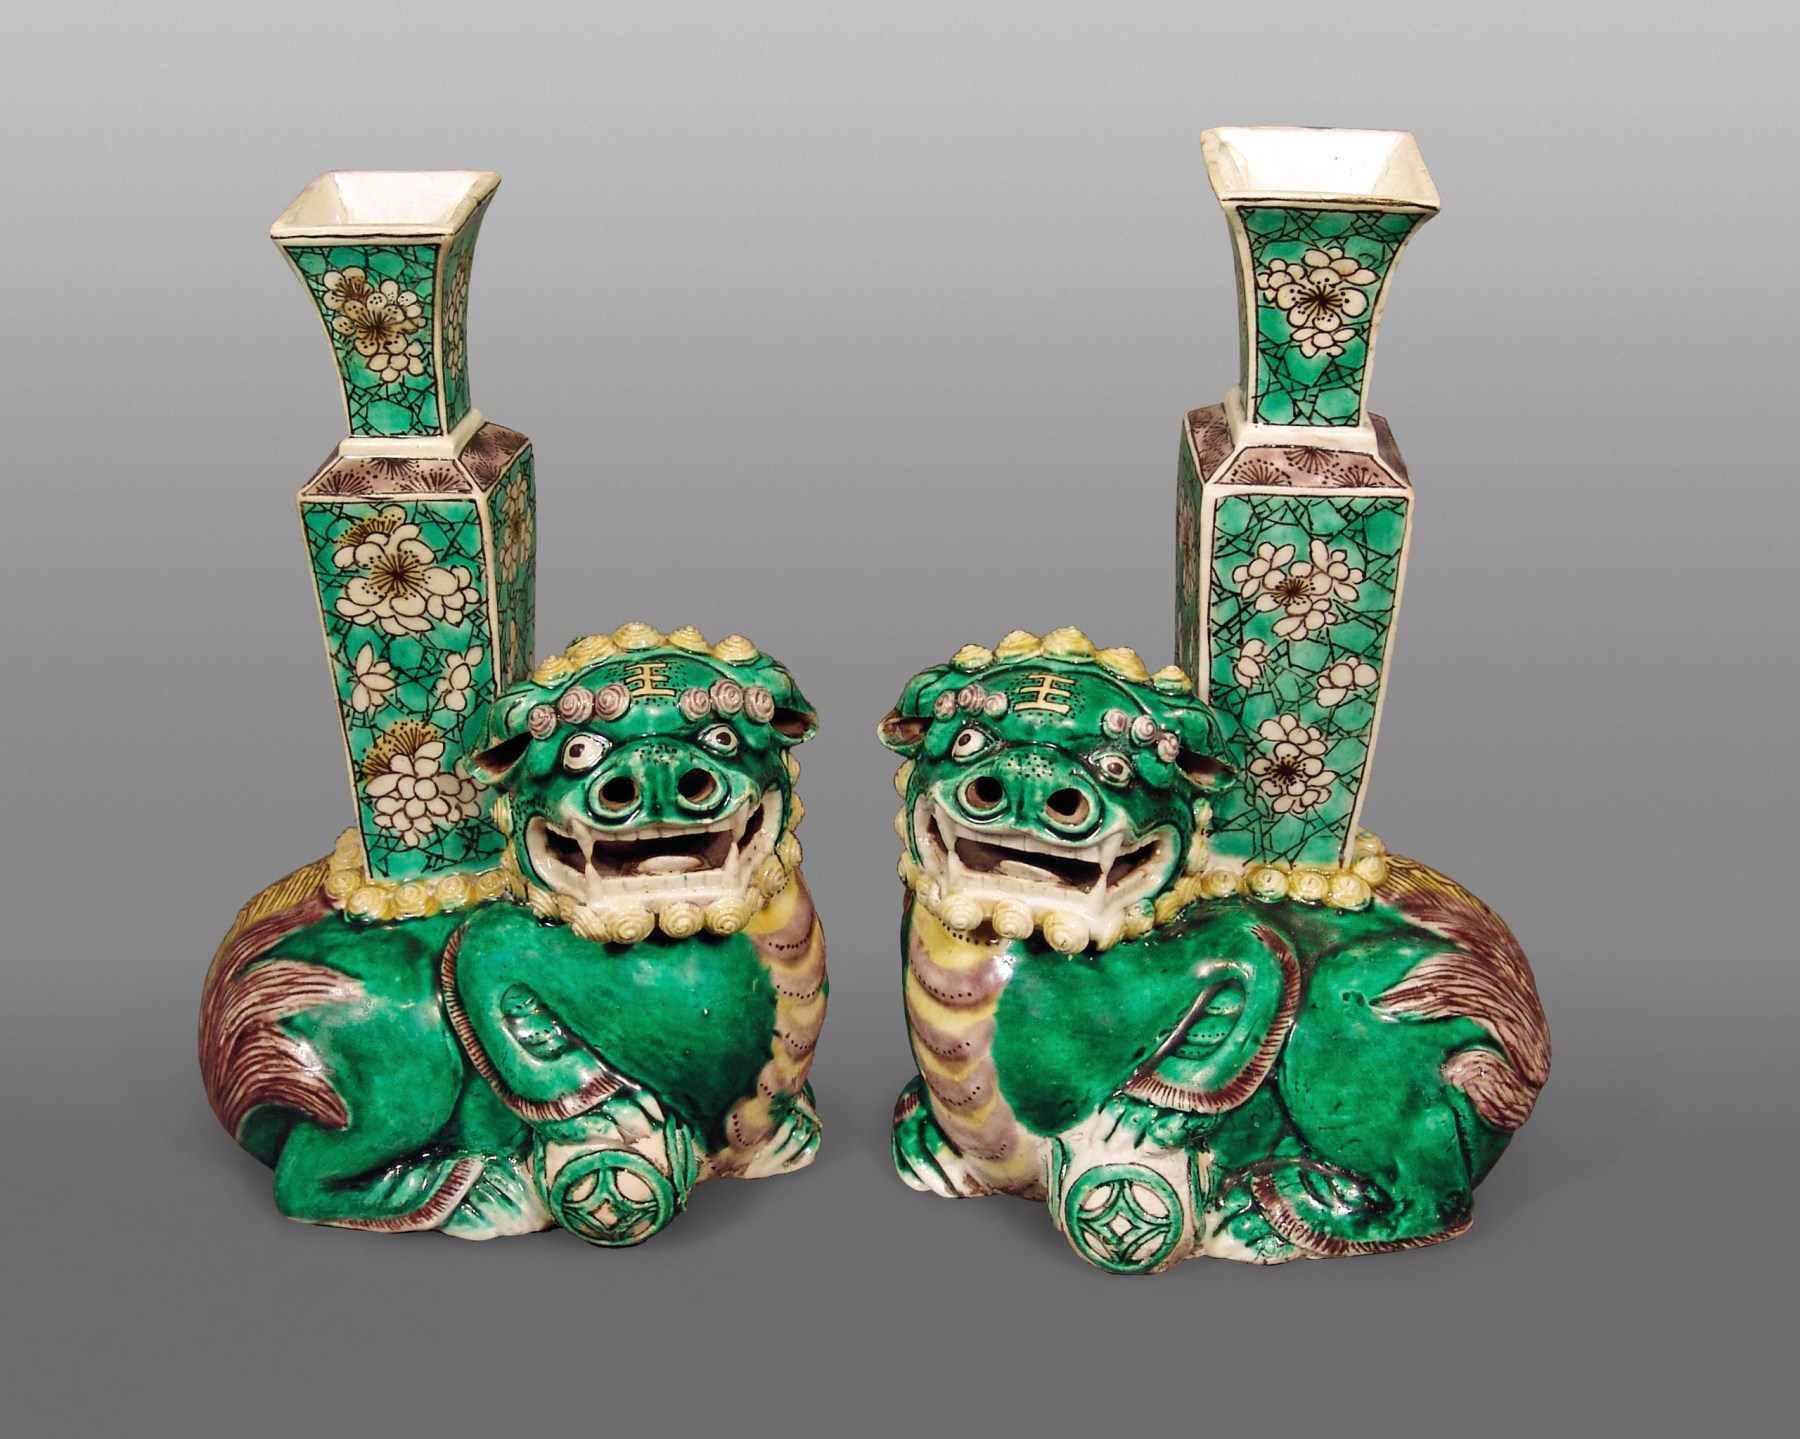 Rare Pair of Chinese Glazed Biscuit Porcelain Recumbent Fu Lions